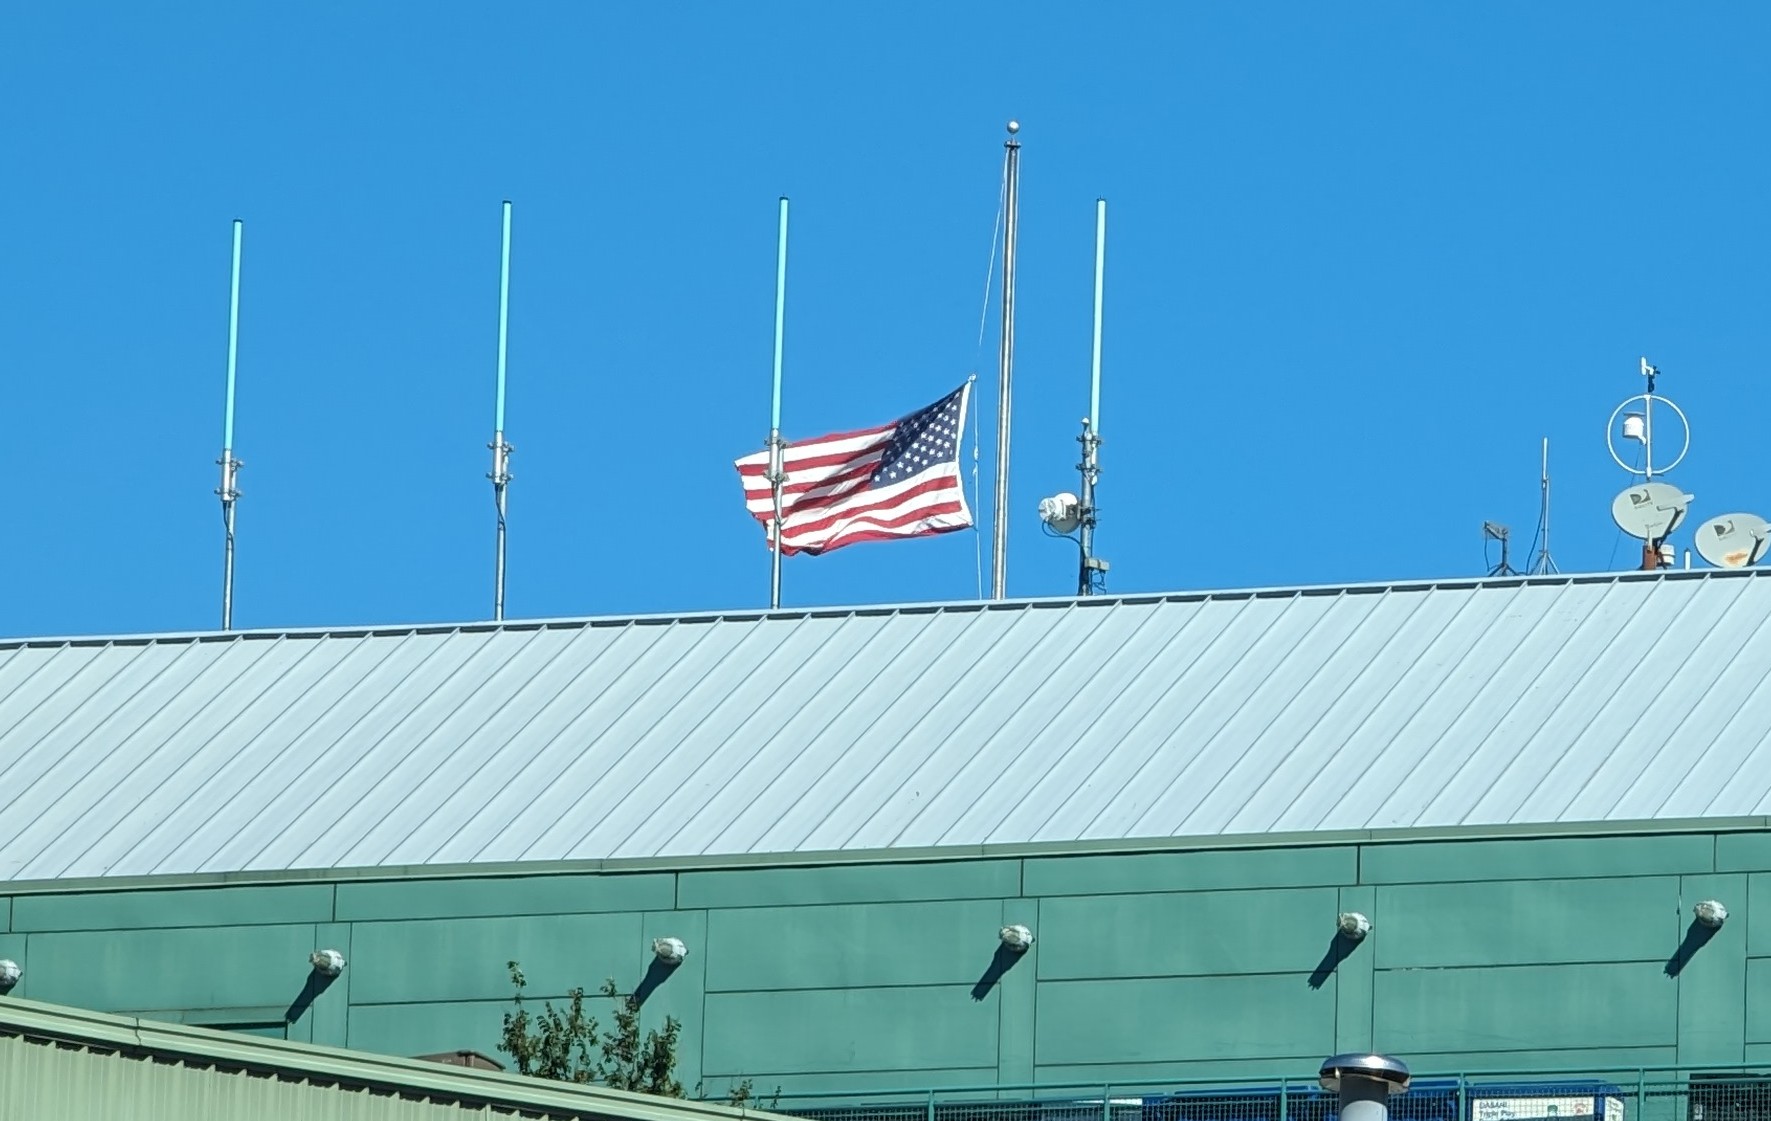 Flag lowered at Fenway